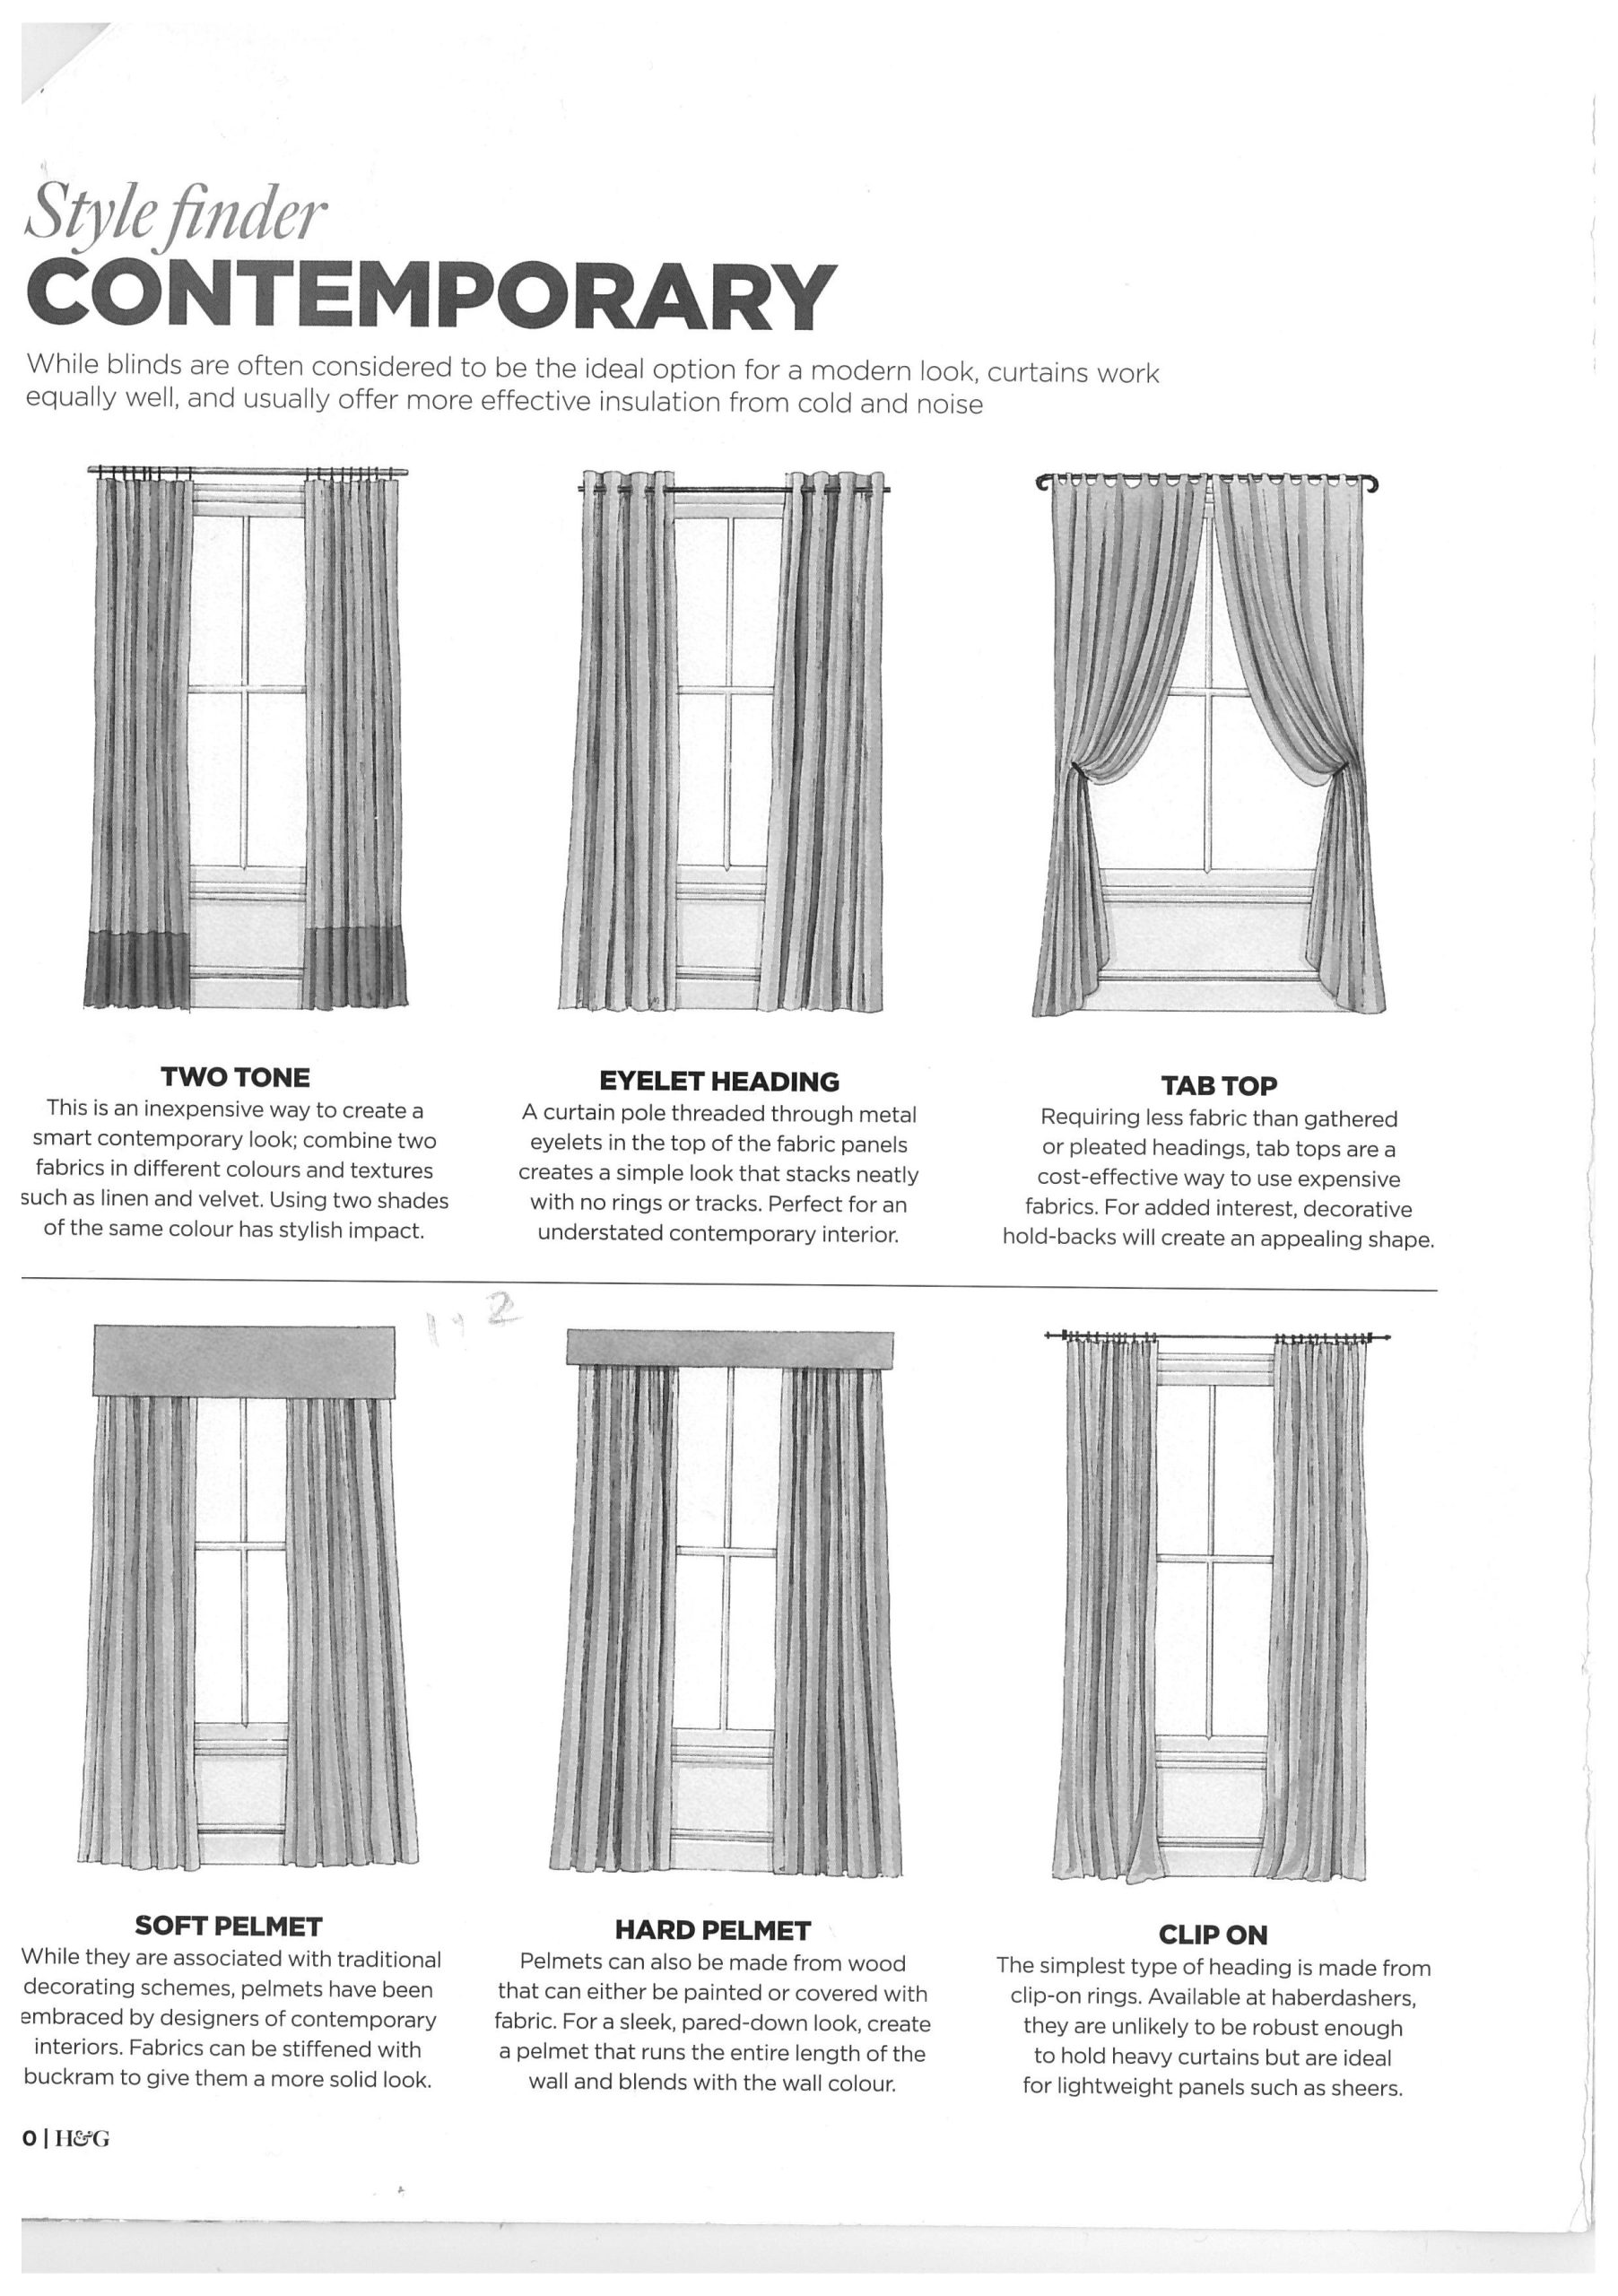 Essential Curtain Terminology Every Homeowner Should Know